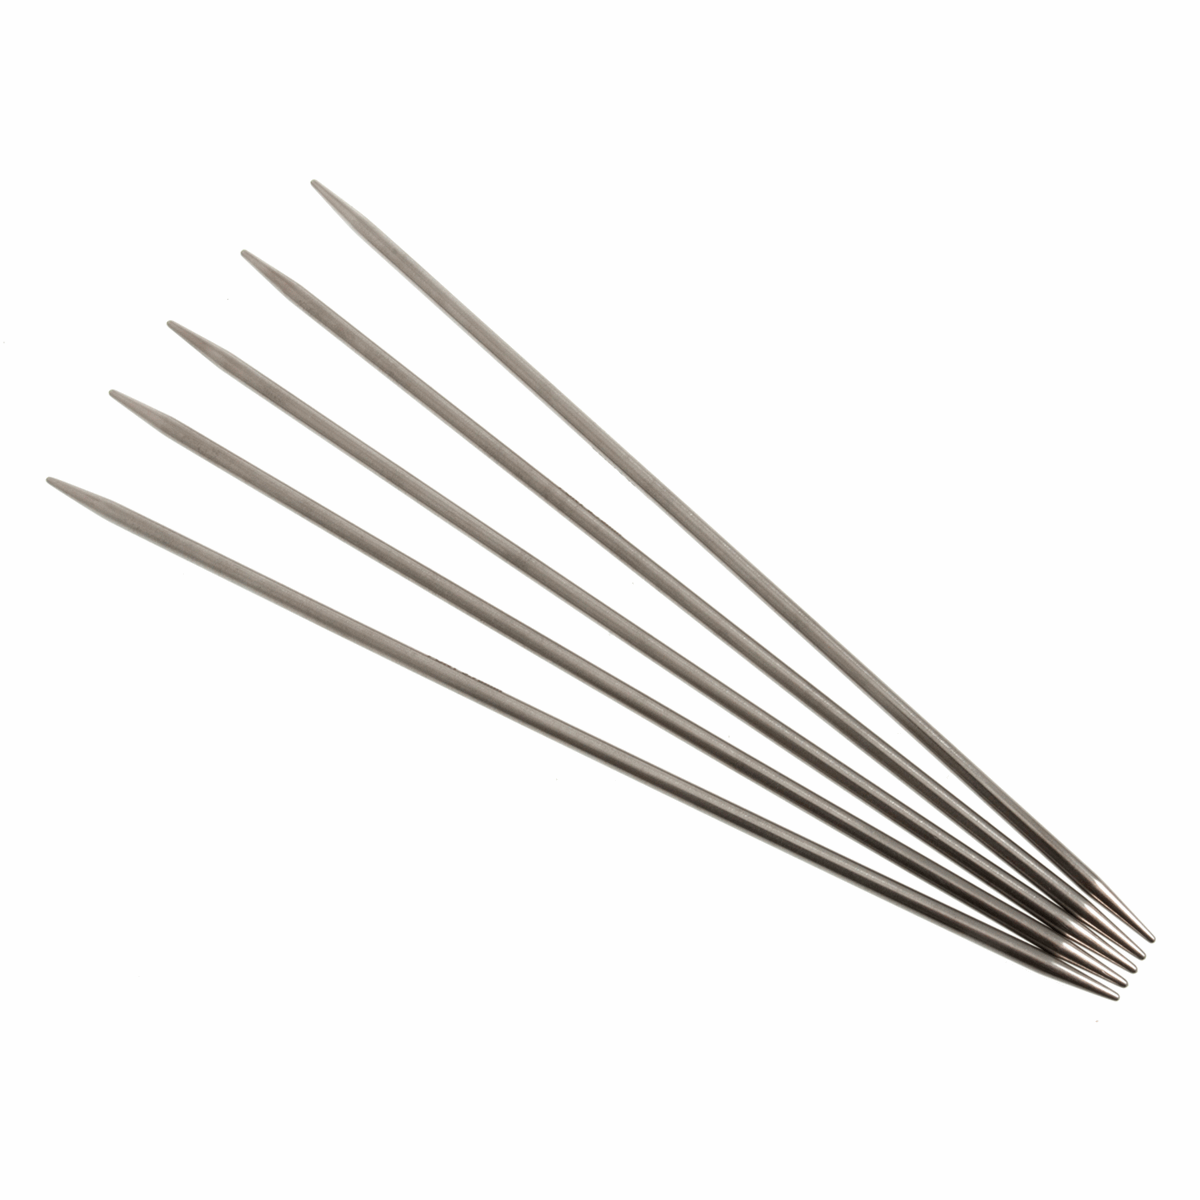 PONY 'Elan' Double-Ended Stainless Steel Knitting Pins - 20cm x 3.75mm (Set of 5)